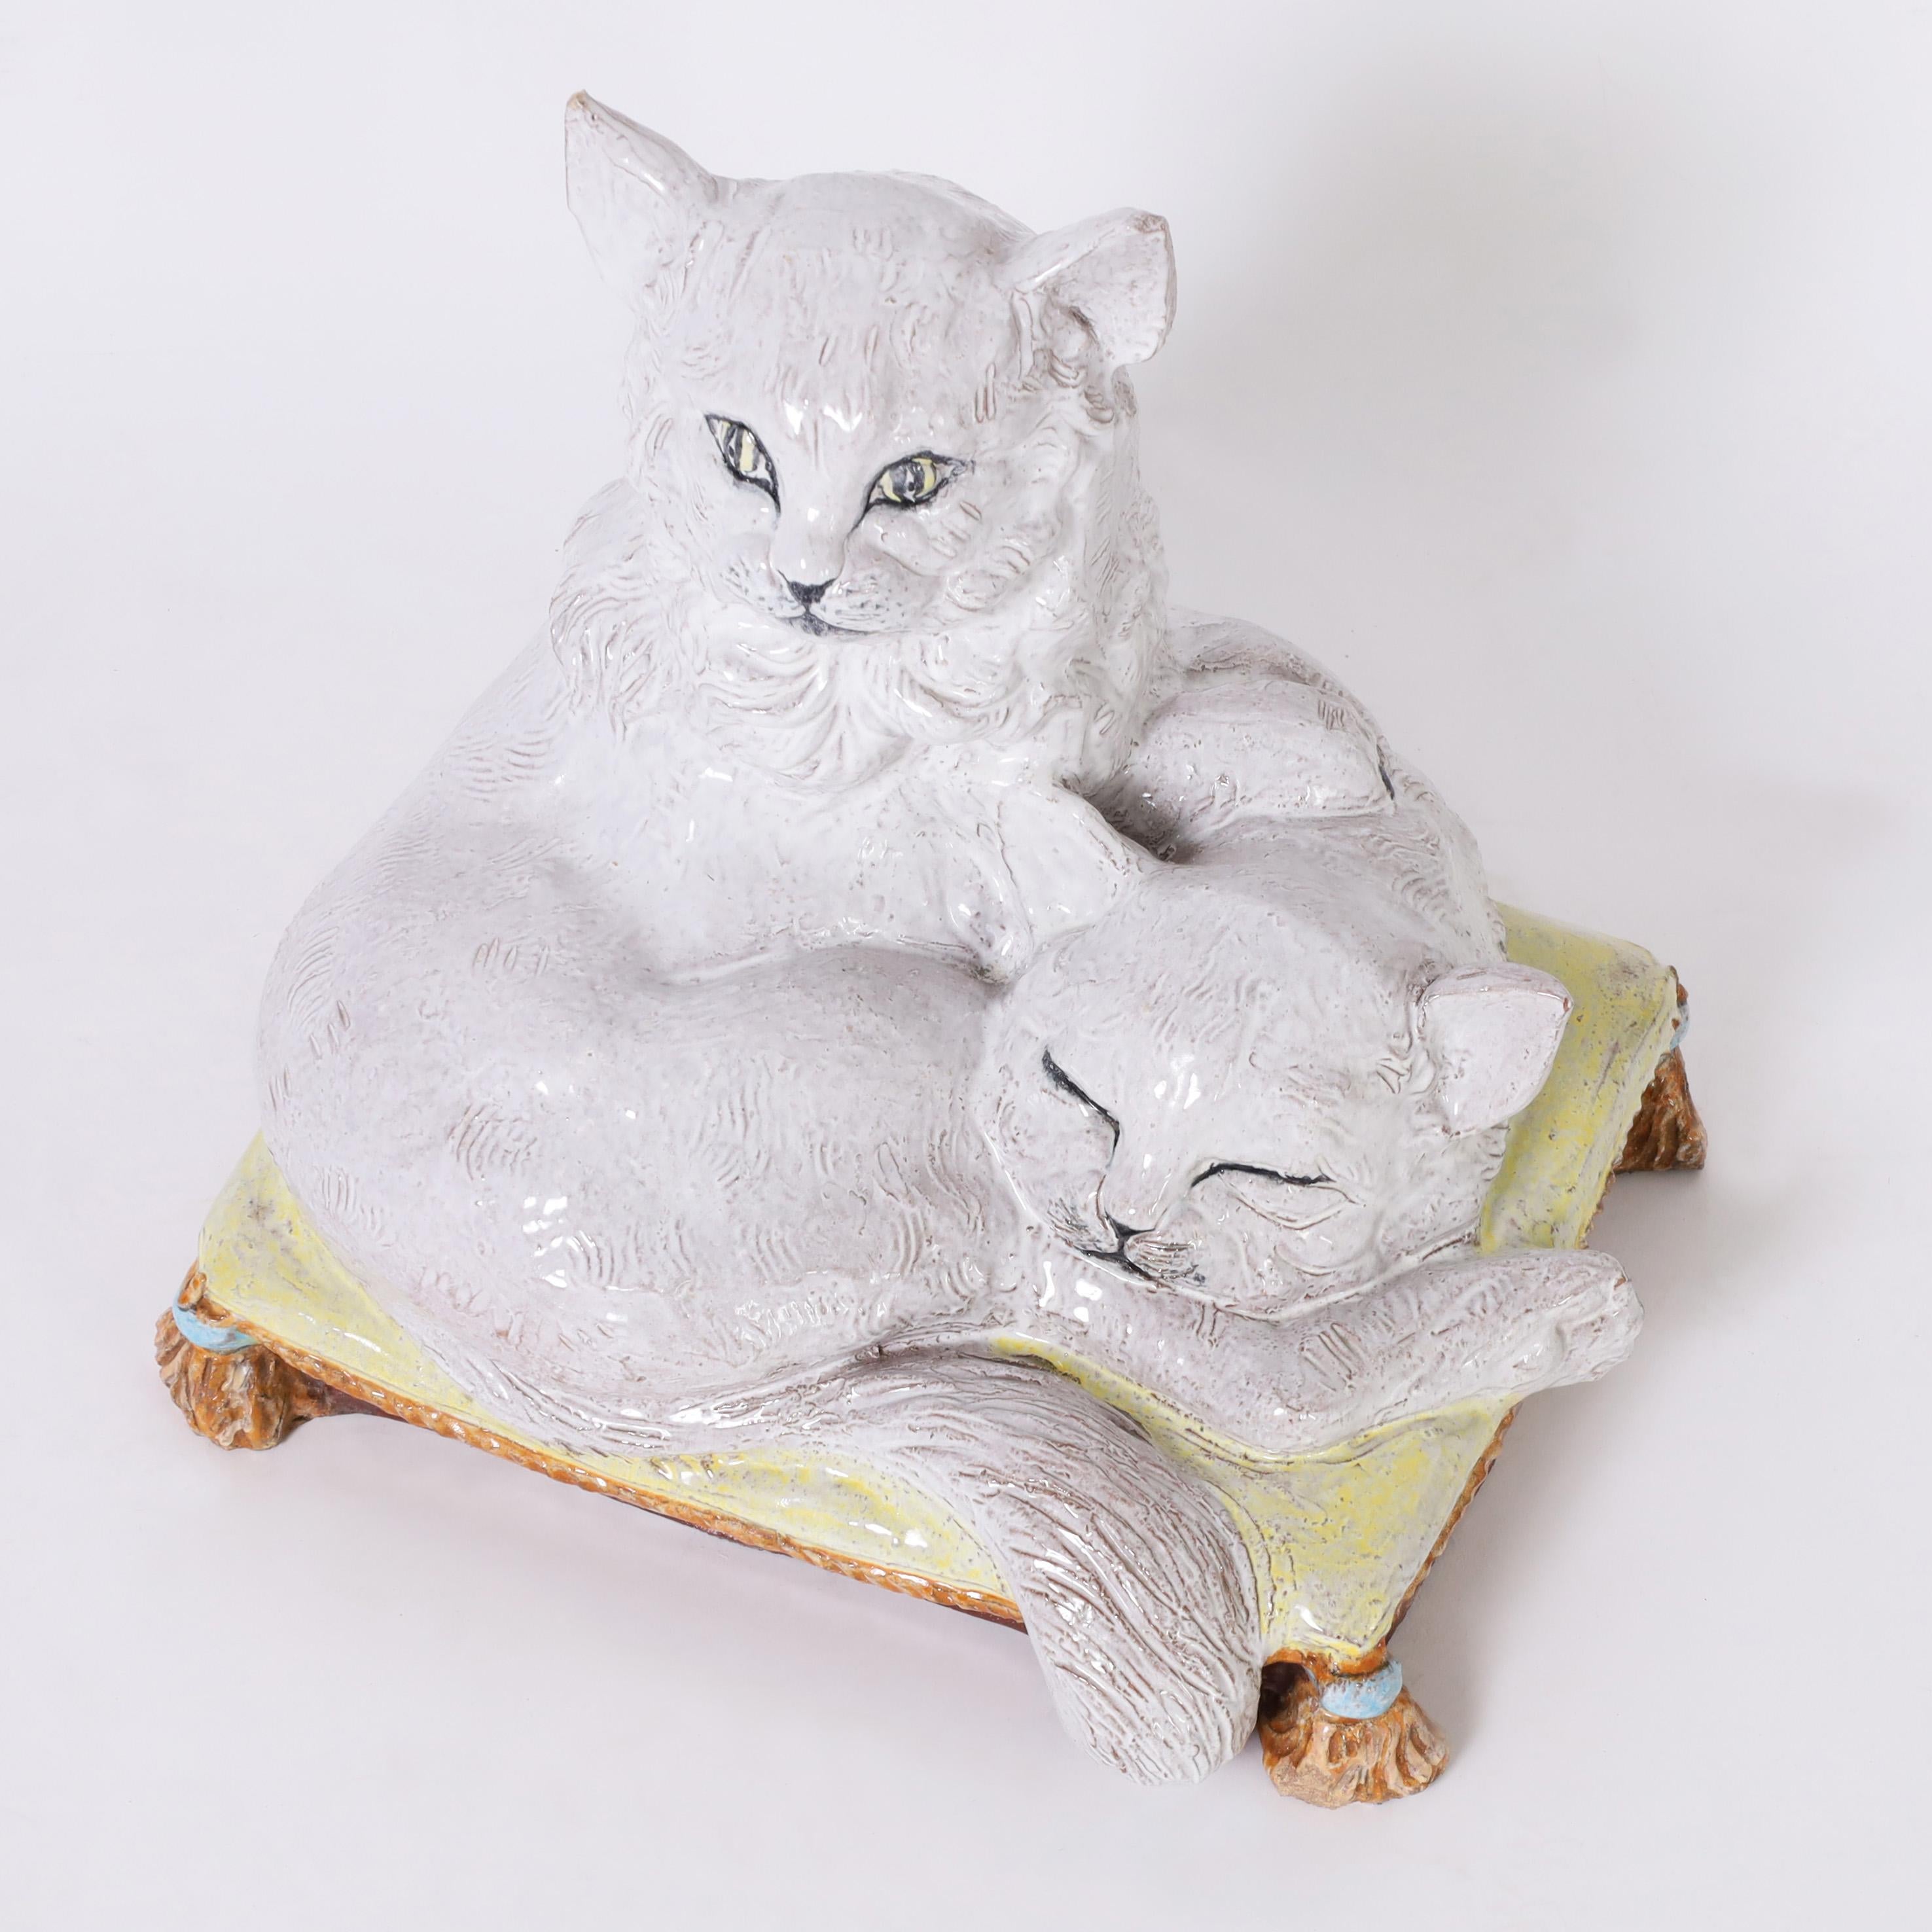 Delightful Italian sculpture of two white cats on a fancy pillow crafted in terra cotta, hand decorated and glazed for your curiosity. 